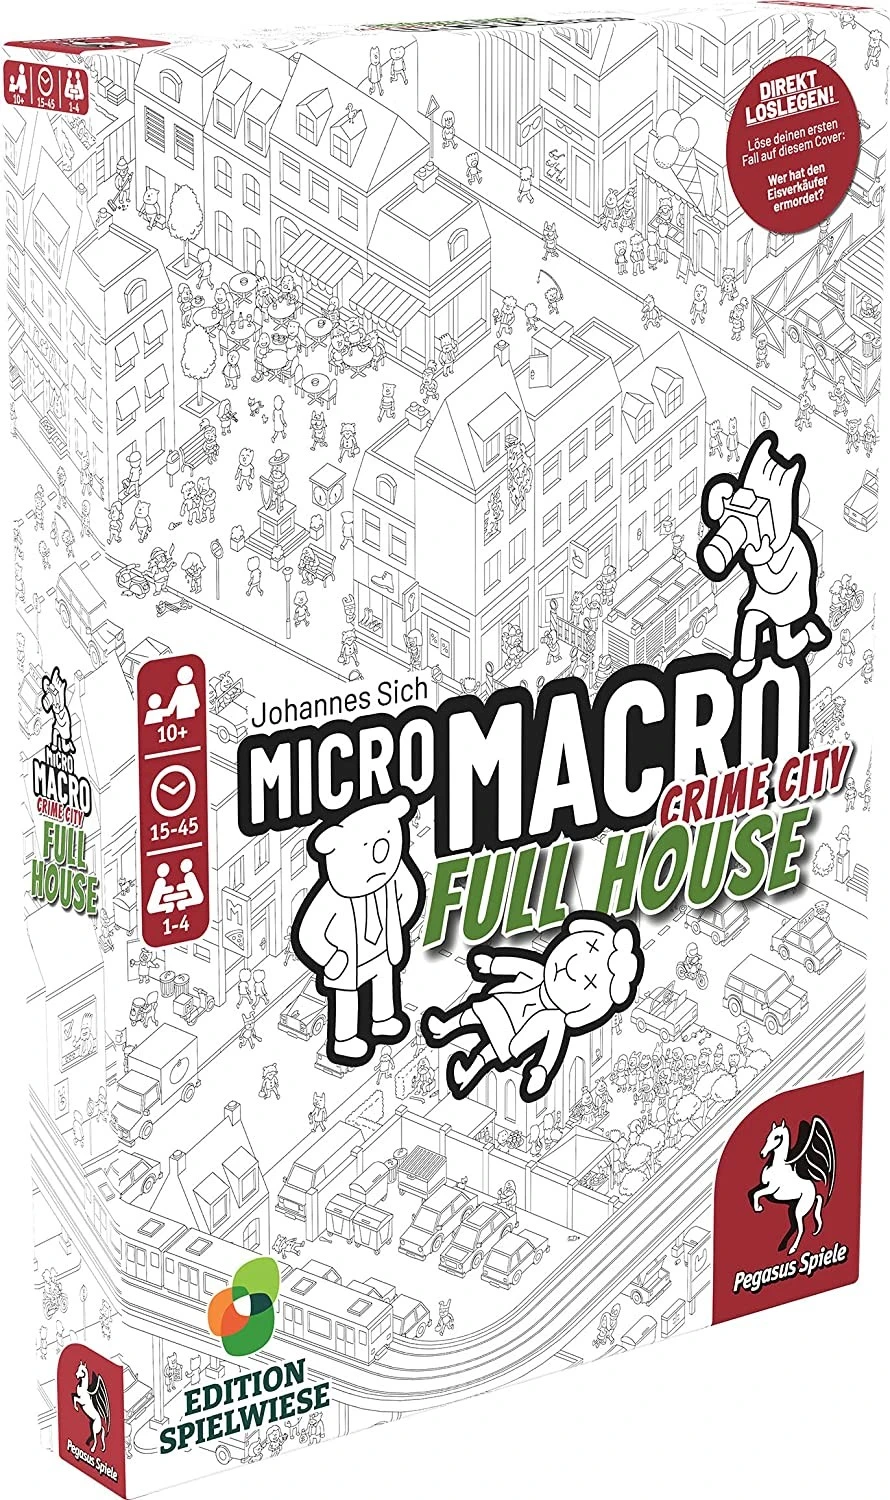 MicroMacro: Crime City 2 - Full House (Edition Spielwiese)